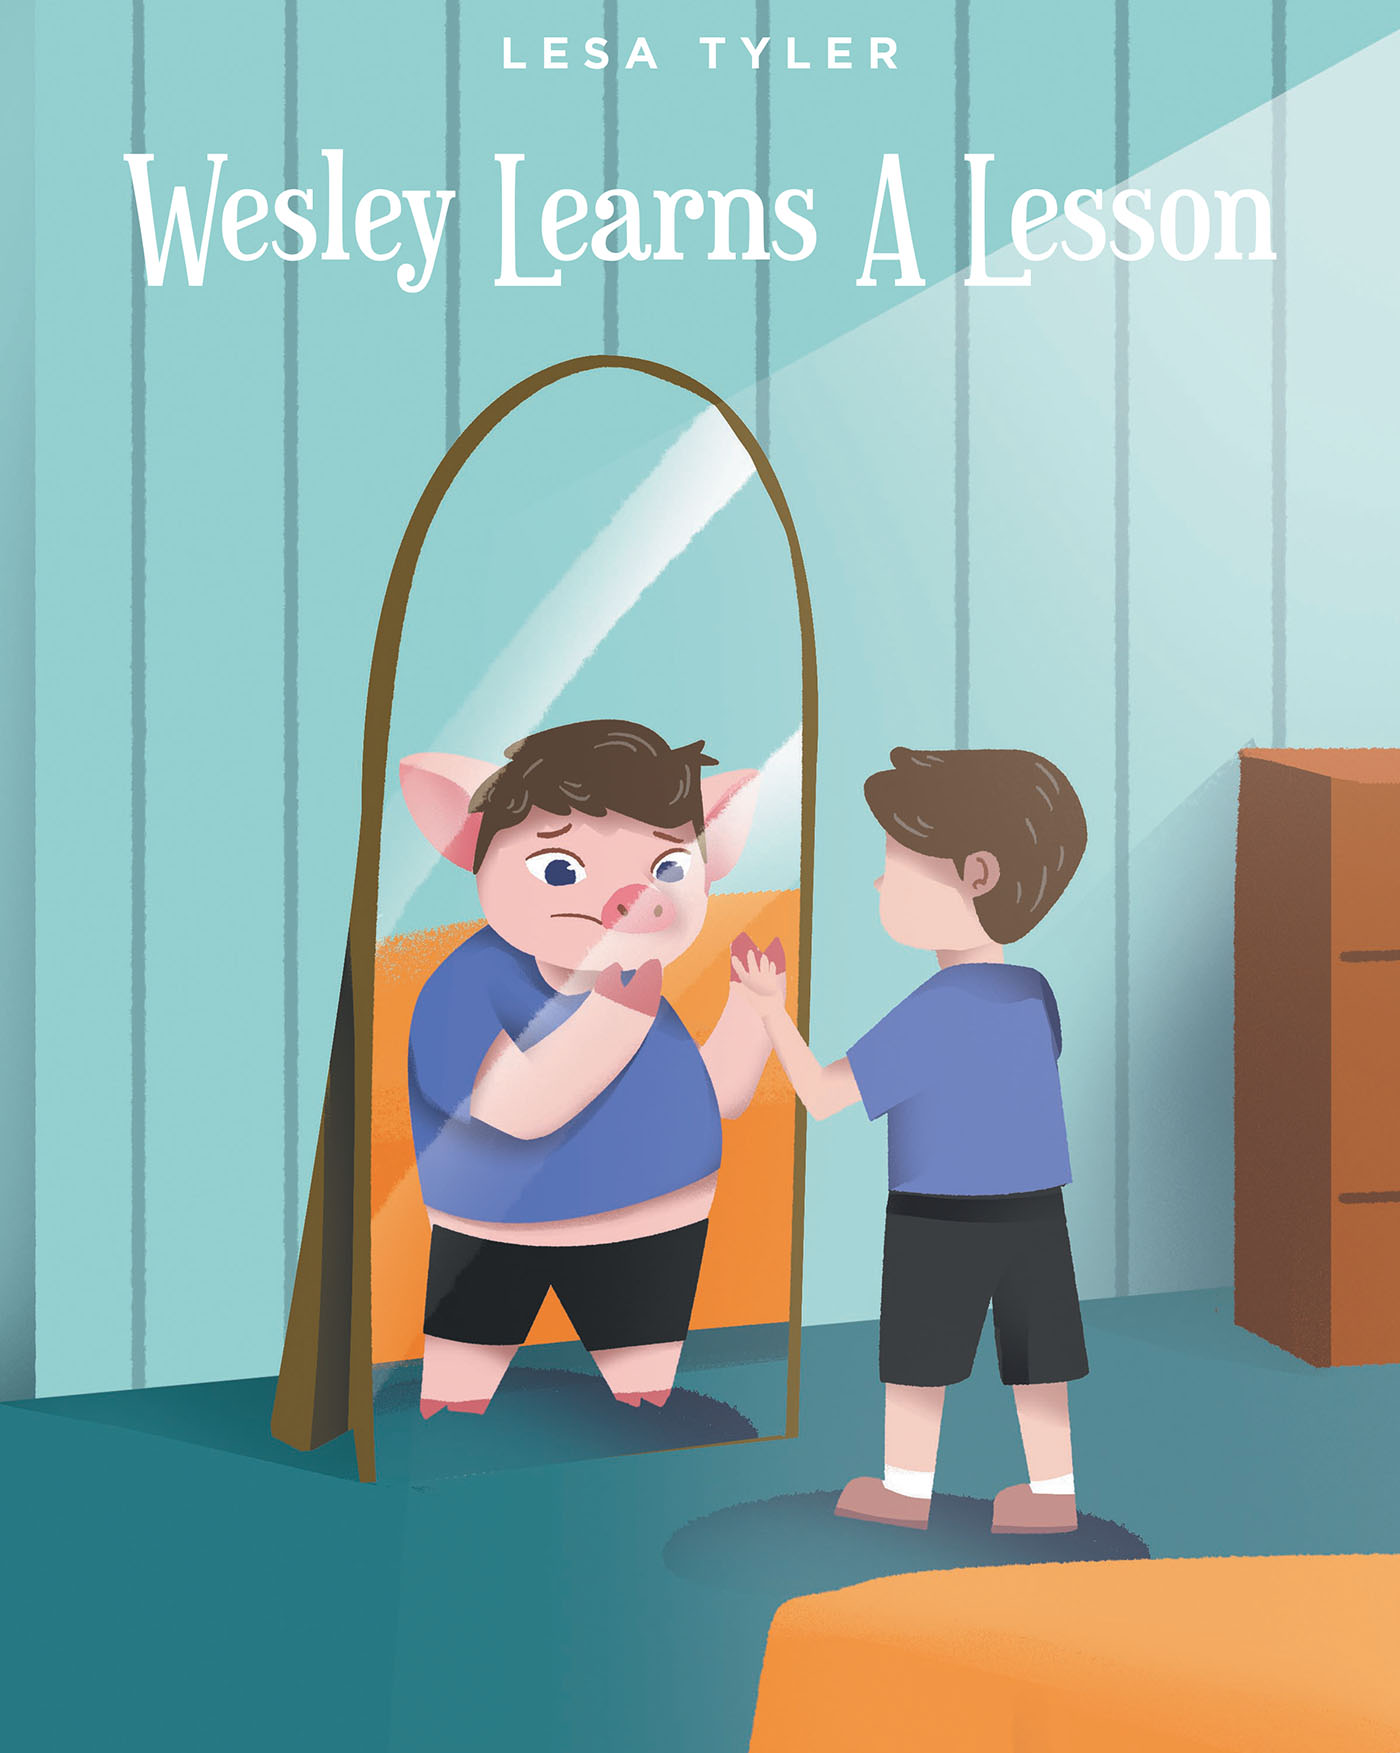 Lesa Tyler’s Newly Released "Wesley Learns A Lesson" is an Amusing Tale of a Young Boy Who Finds a Shocking Repercussion for Not Sharing the Ball at Recess